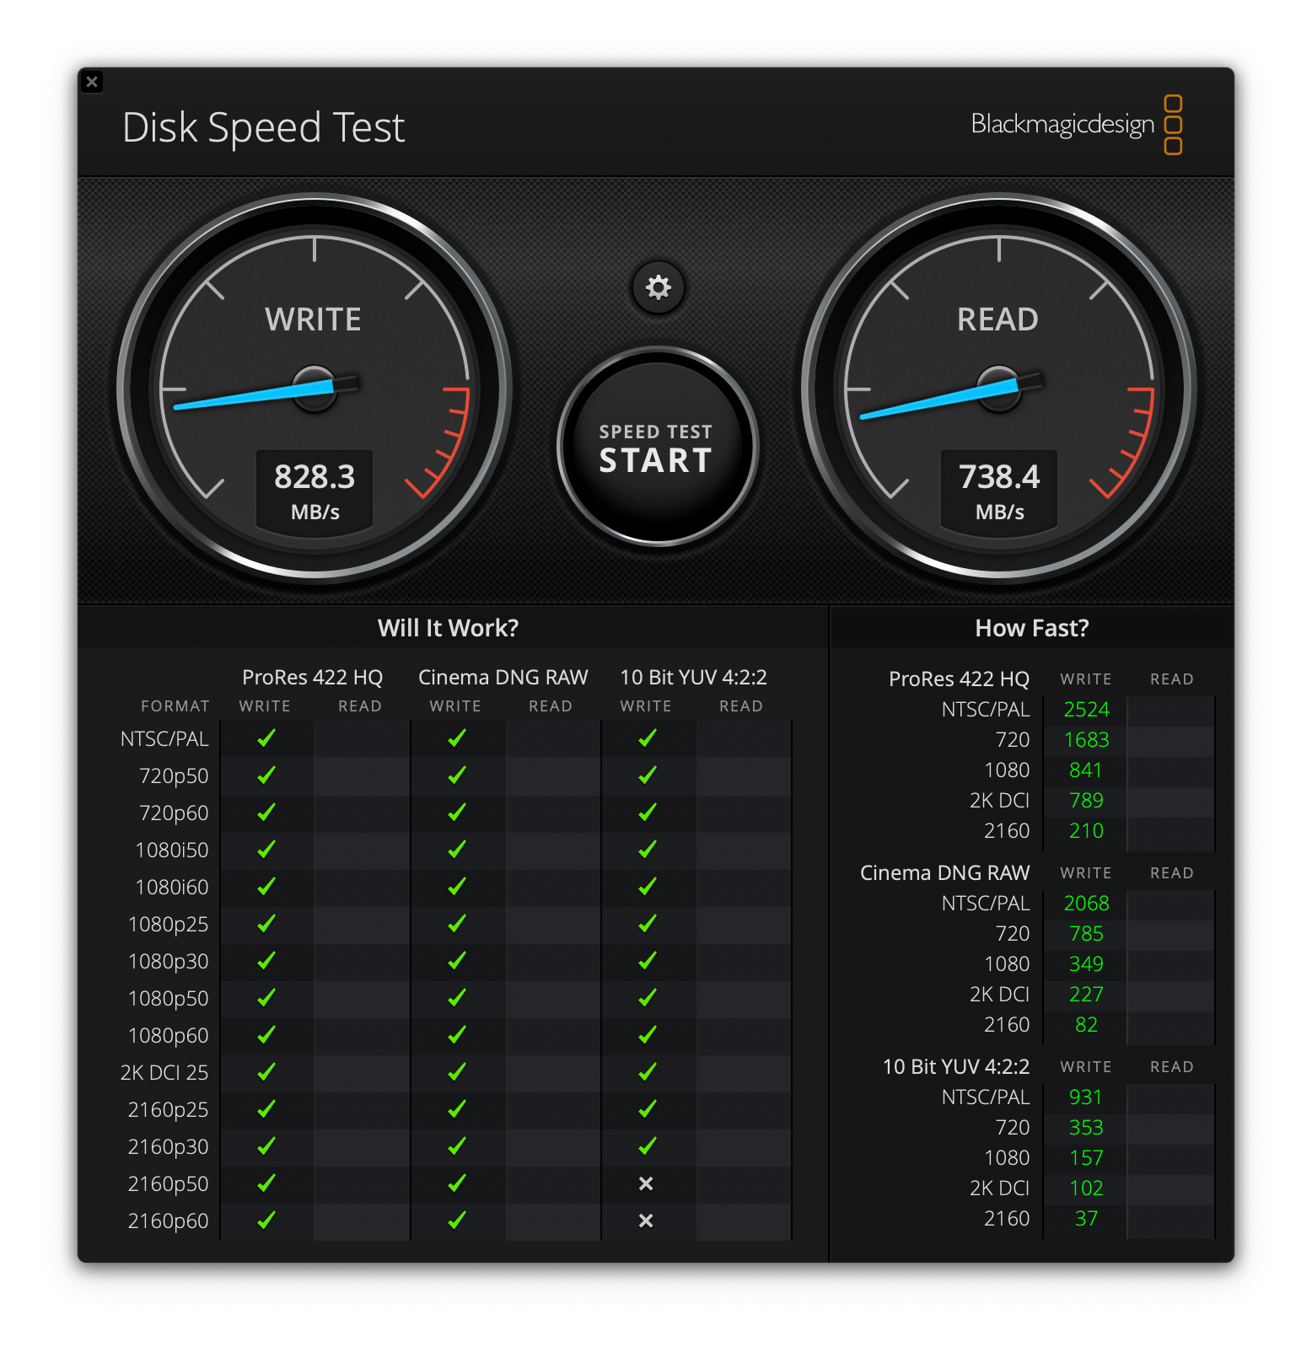 Speed test results when formatted HFS+